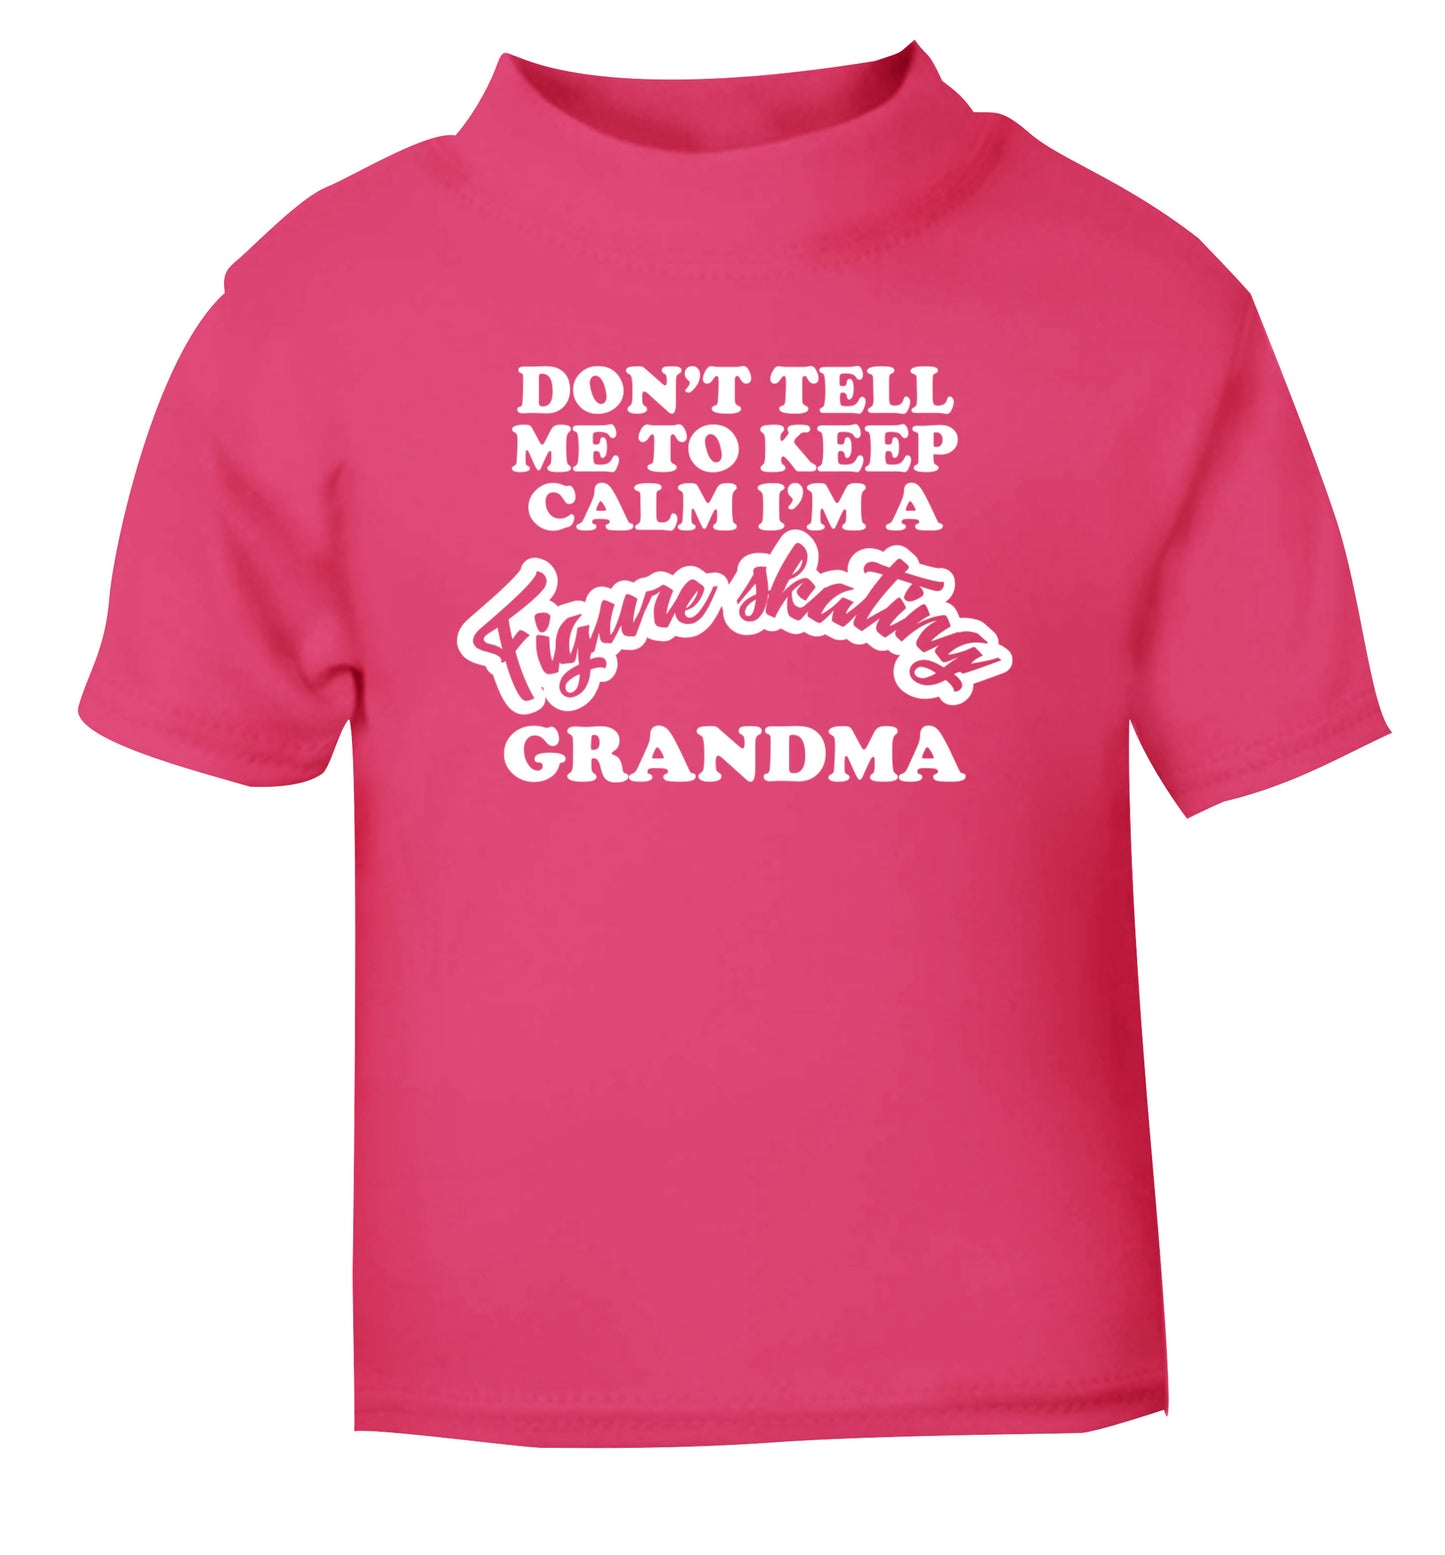 Don't tell me to keep calm I'm a figure skating grandma pink Baby Toddler Tshirt 2 Years